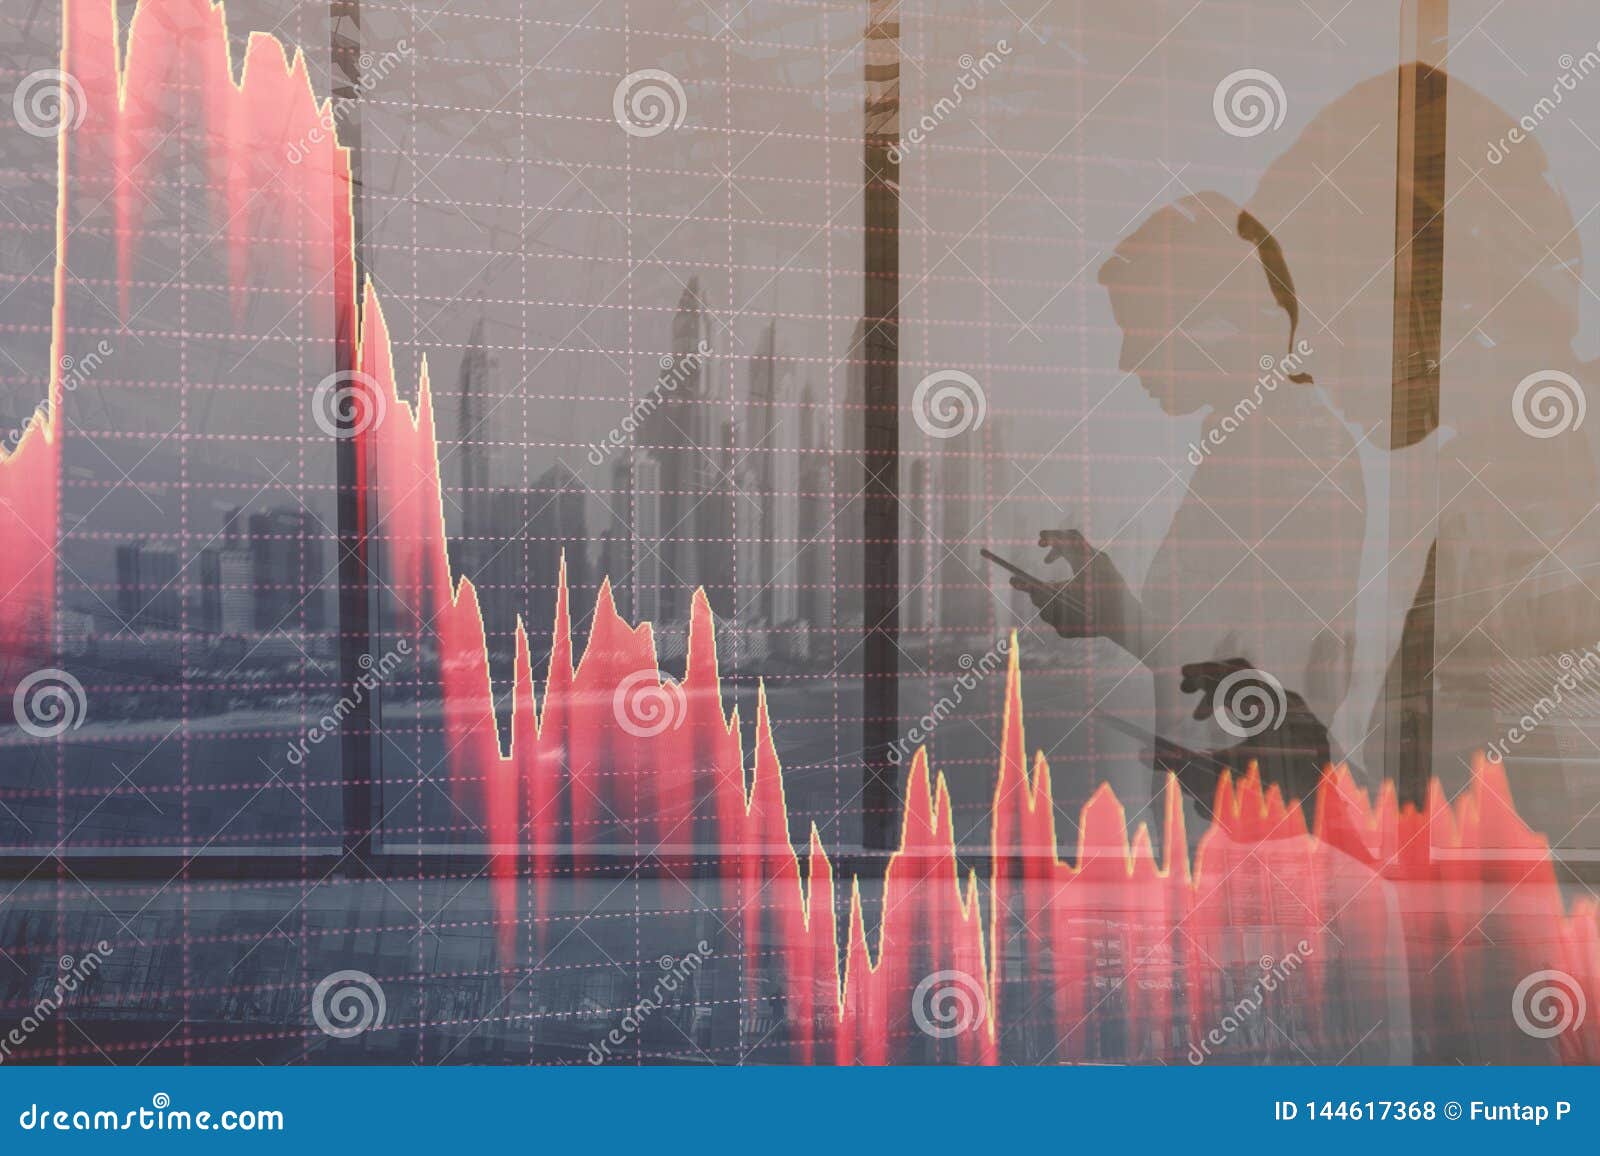 stock markets crash, stock down. graphs against a city people abstract background